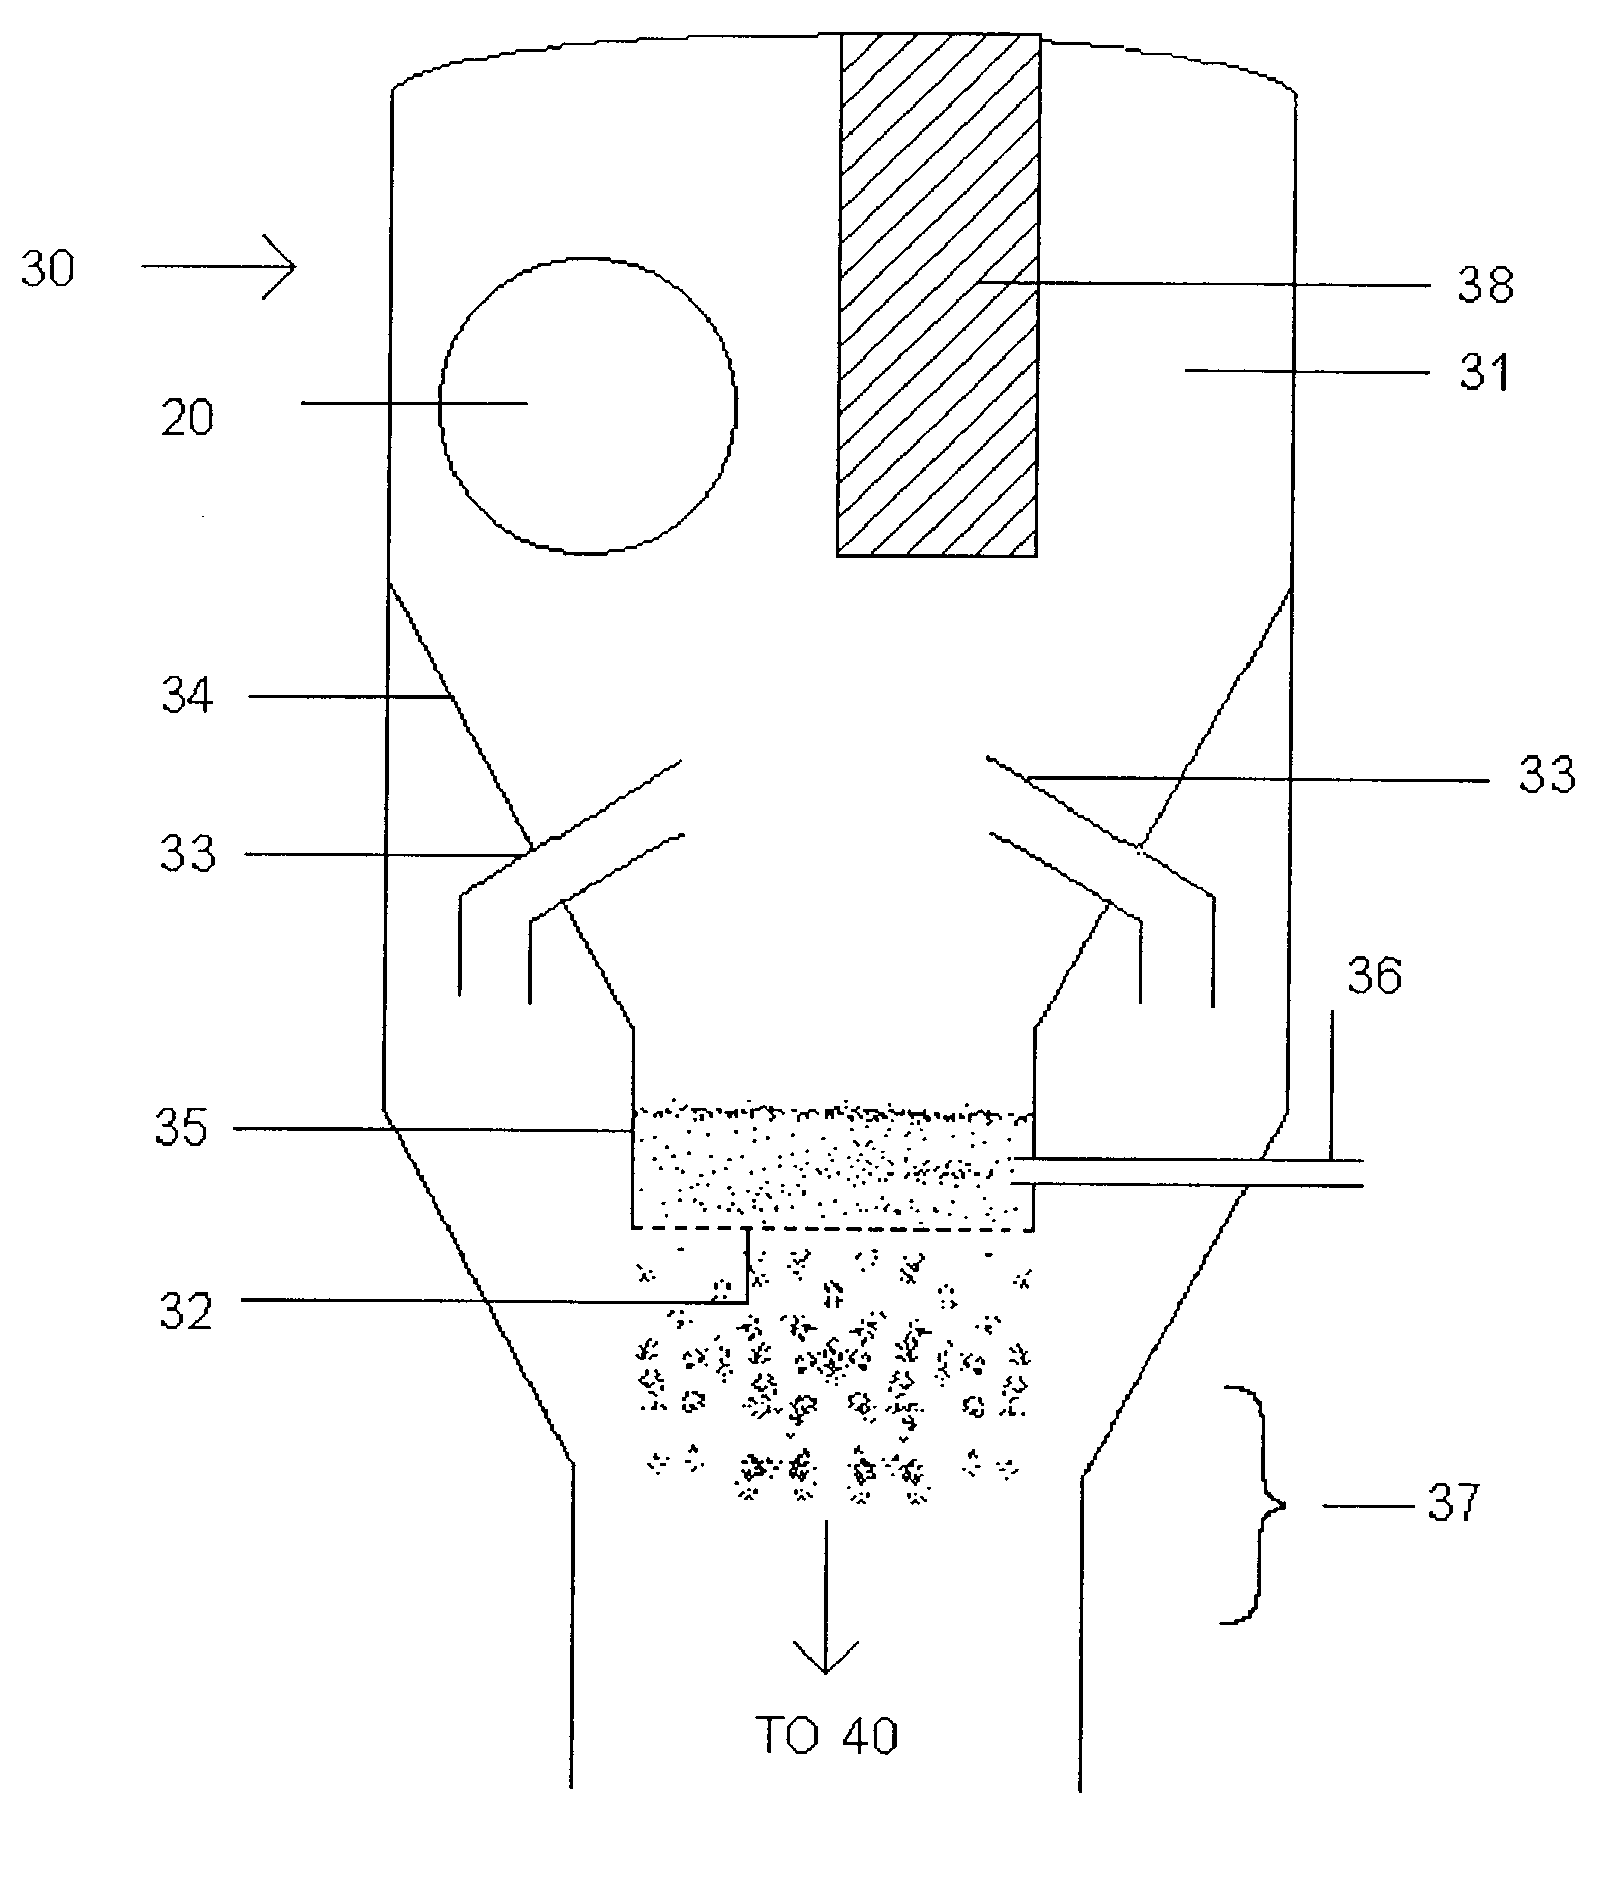 Apparatus and process for downflow fluid catalytic cracking